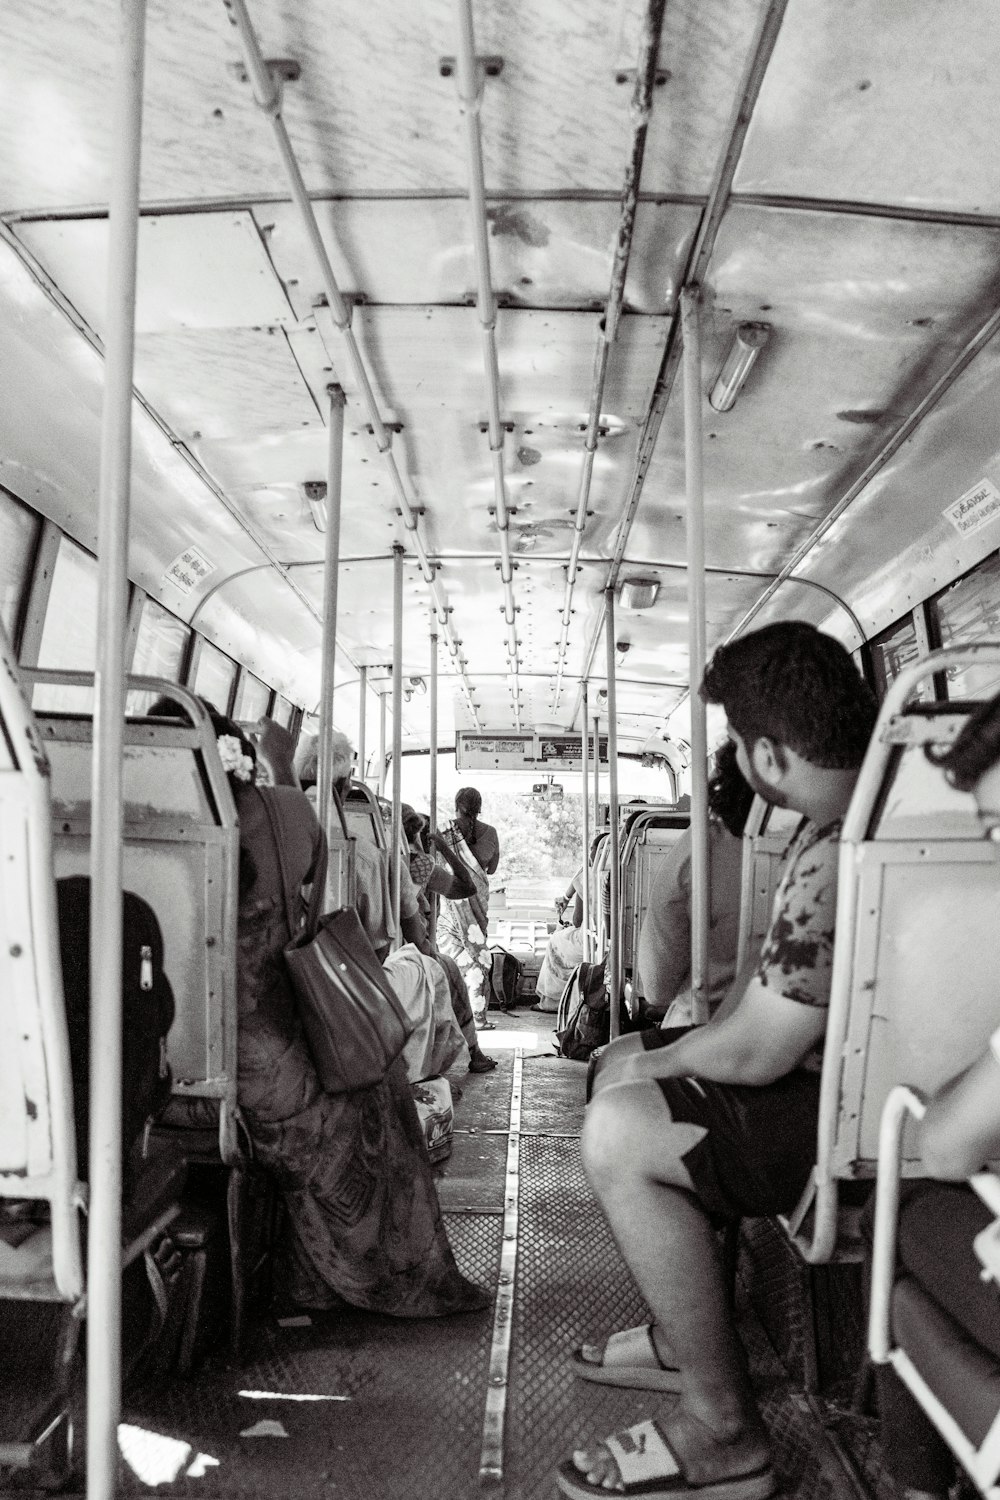 a black and white photo of people sitting on a bus